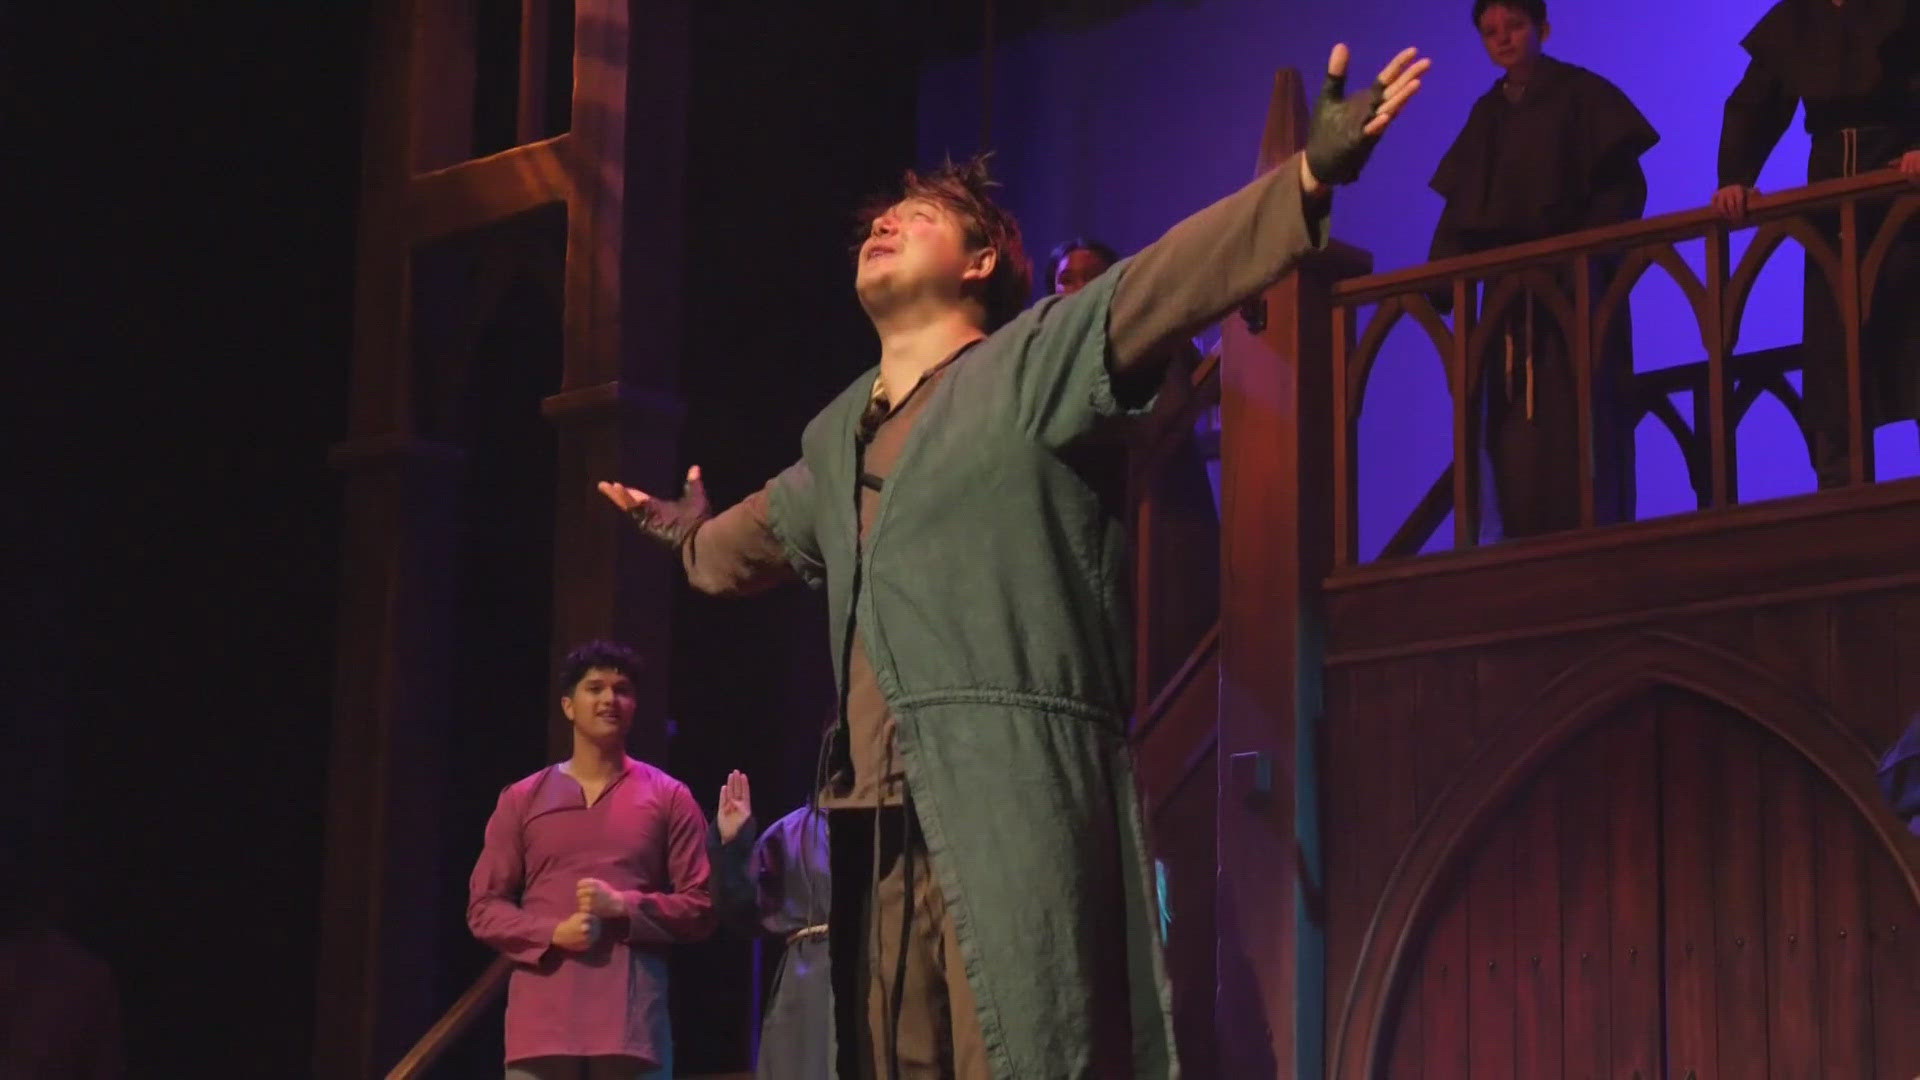 Columbus Children's Theatre's production of "Disney's The Hunchback of Notre Dame" runs through May 5 at the Lincoln Theatre in downtown Columbus.